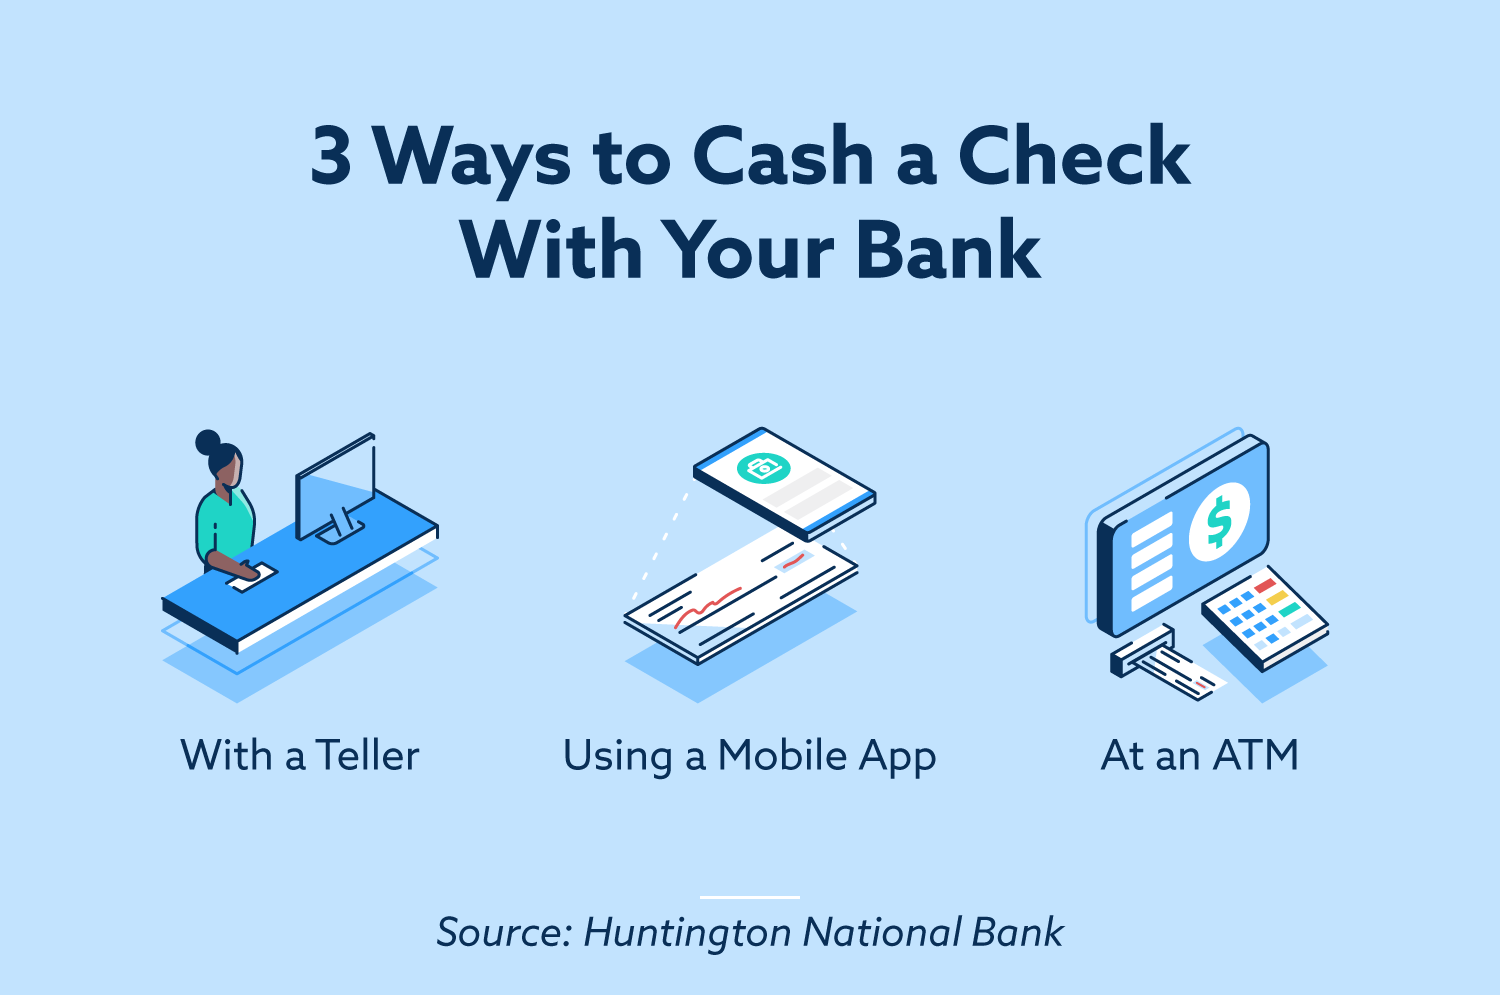 3 ways to cash a check with your bank. With a teller, using a mobile app, at an ATM. 